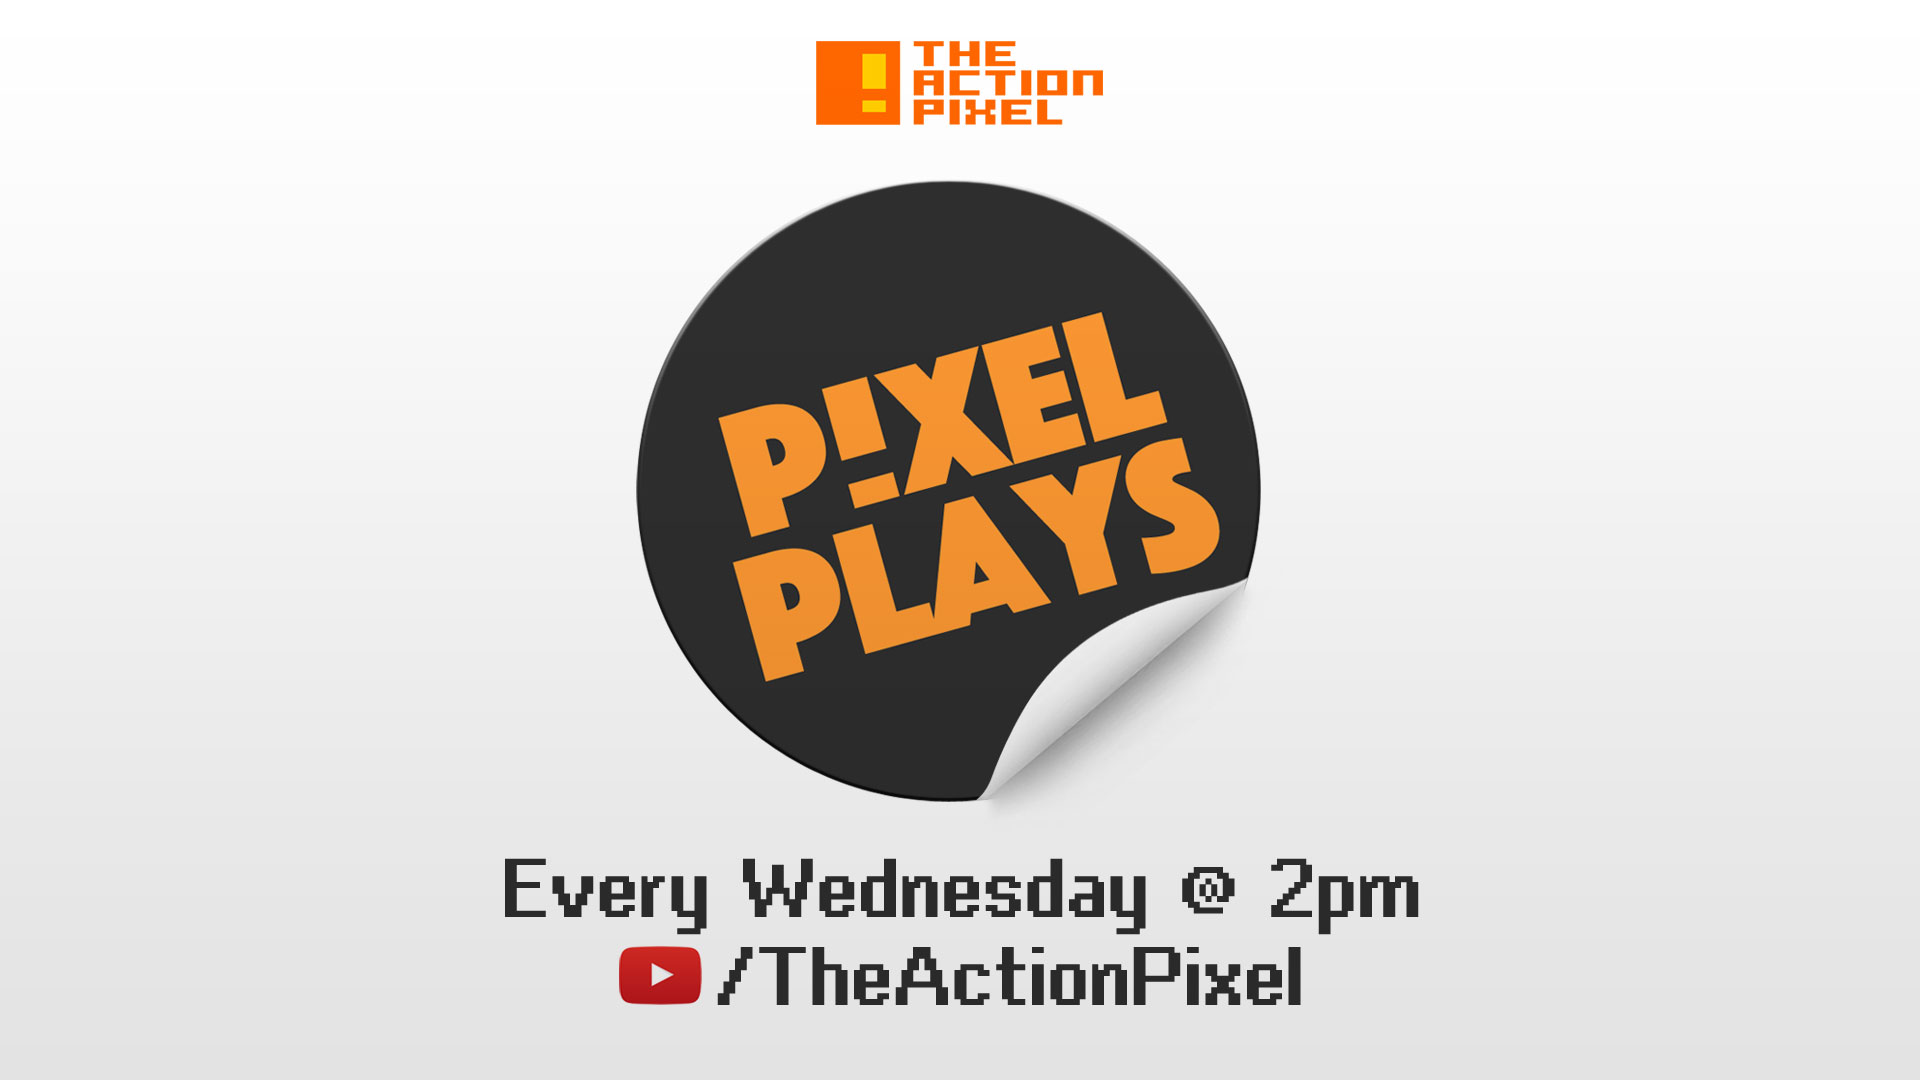 PIXEL PLAYS BANNER. the action pixel. @theactionpixel. All rights reserved.